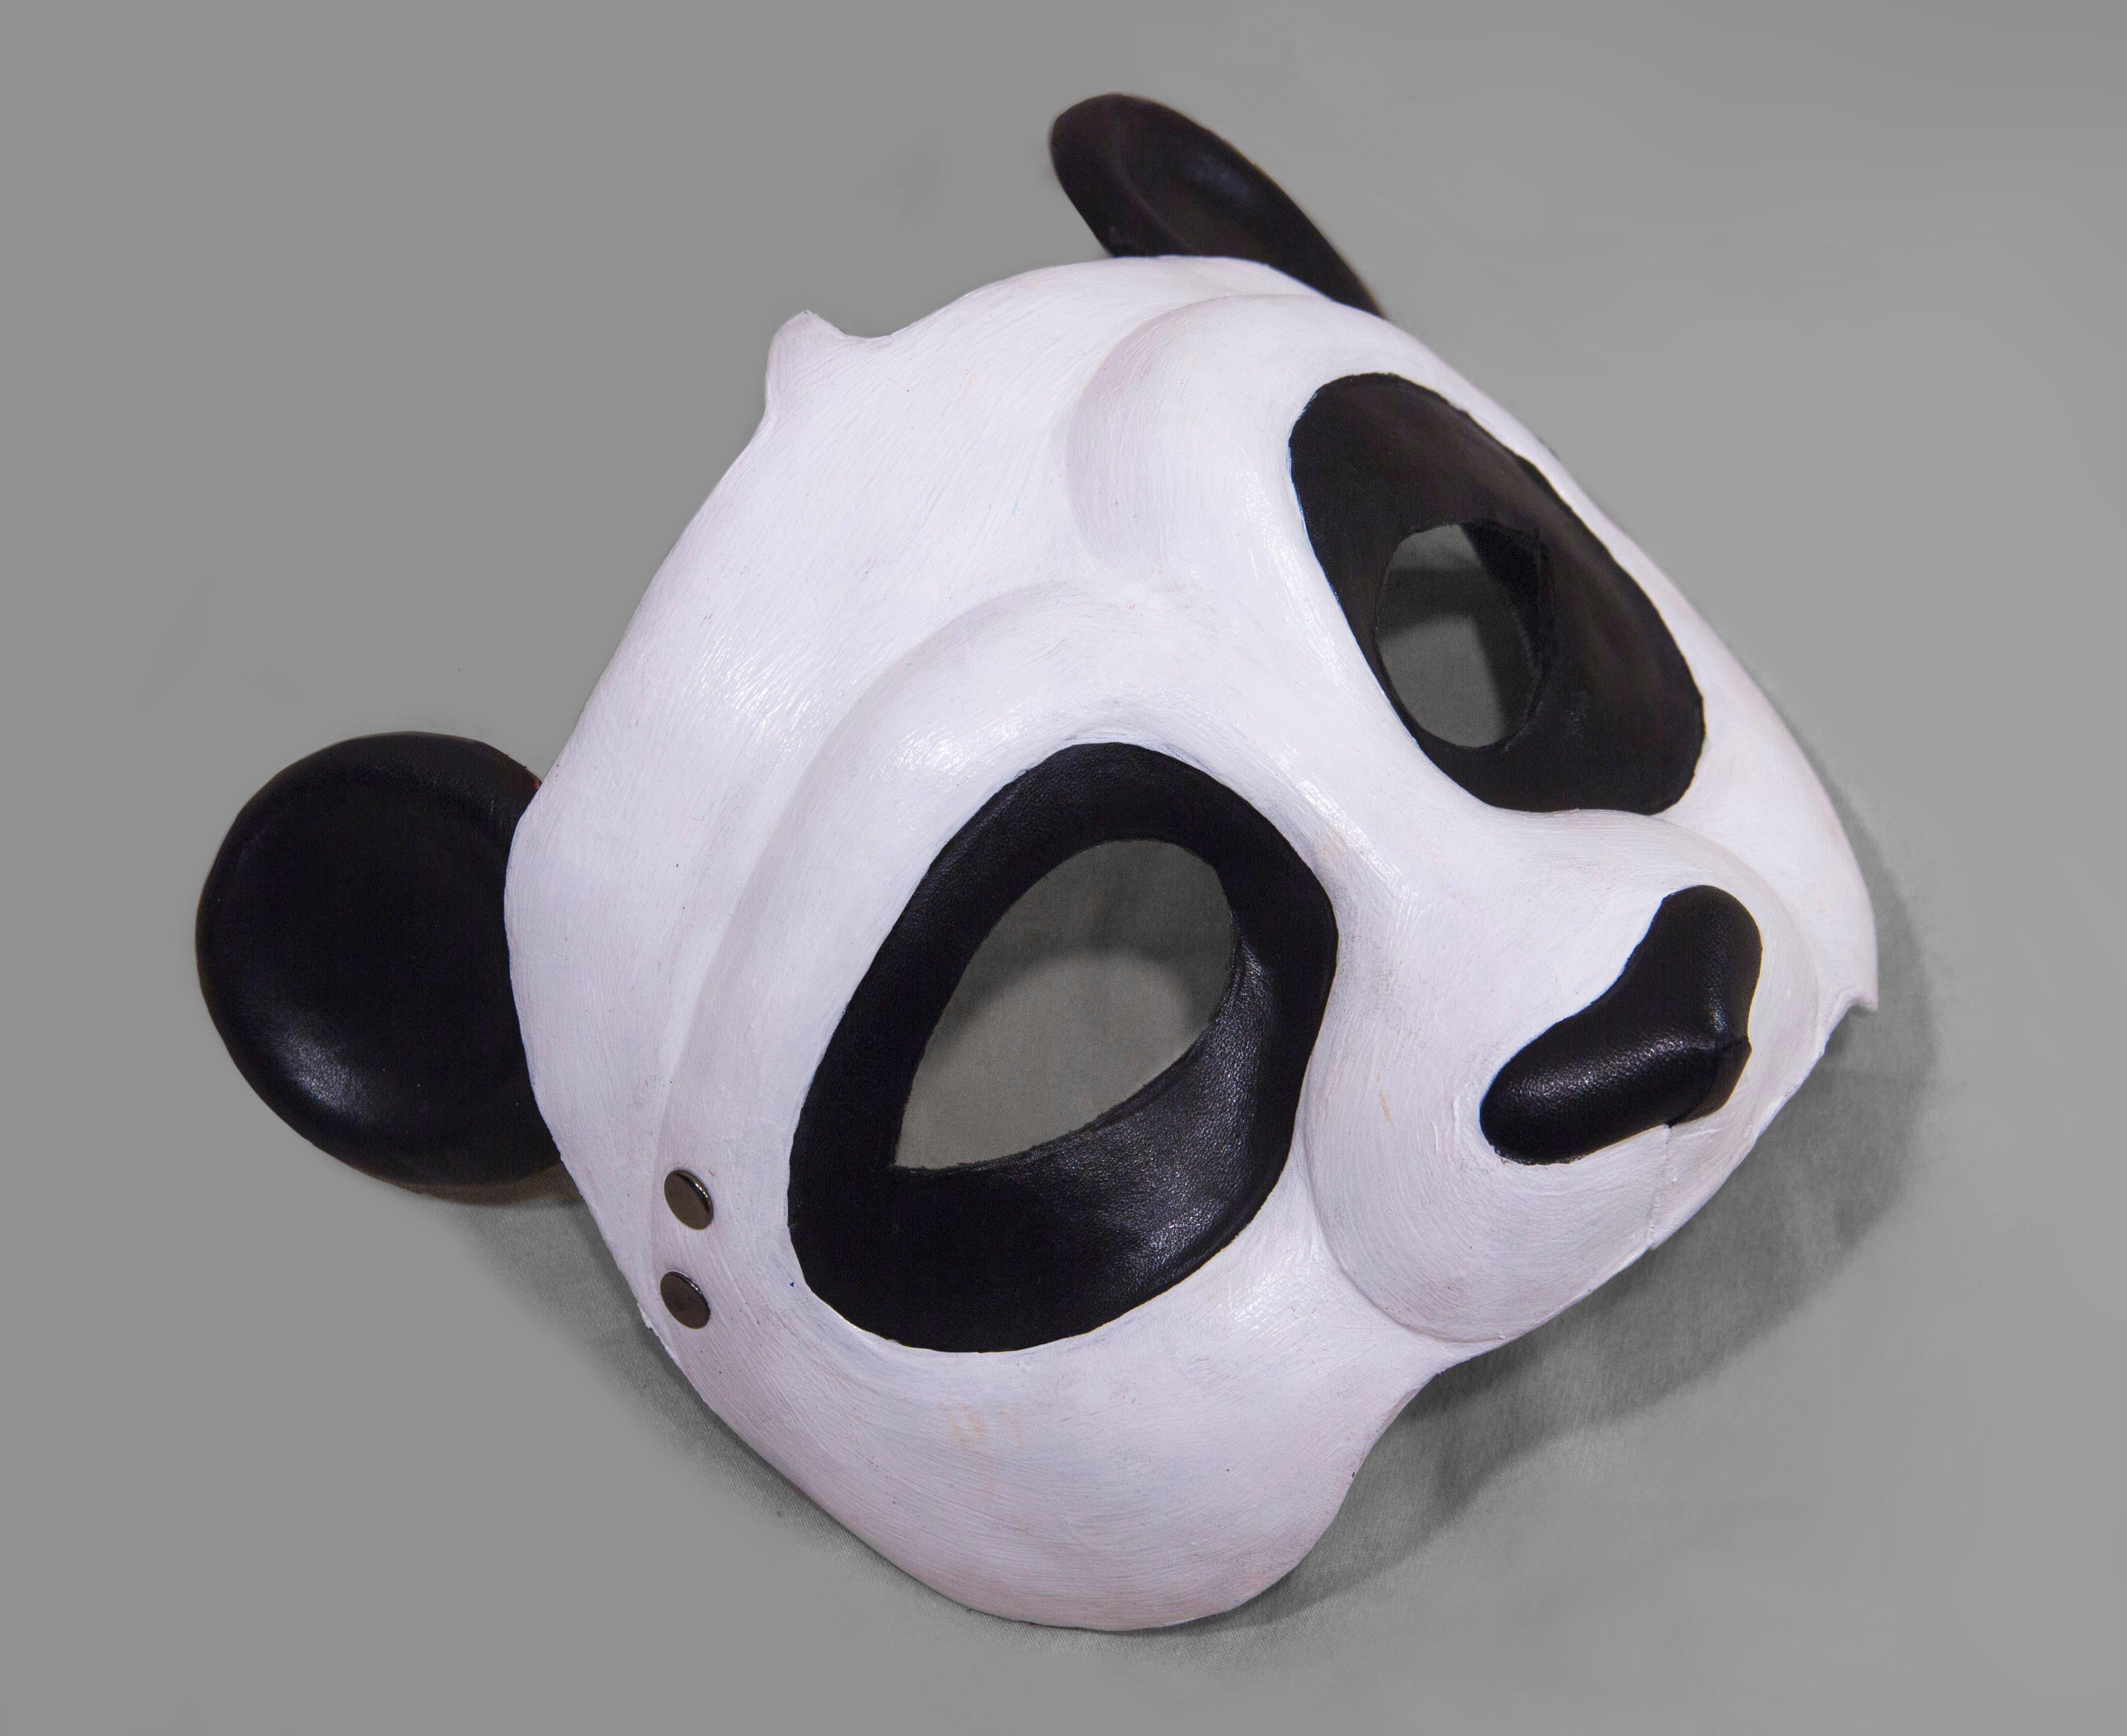 Note: This mask is Made to Order and takes around 1-2 weeks to complete. Custom measurements will be requested upon purchase to ensure a perfect fit!

Want this piece in a different color or need something unique for a special event? Just message me